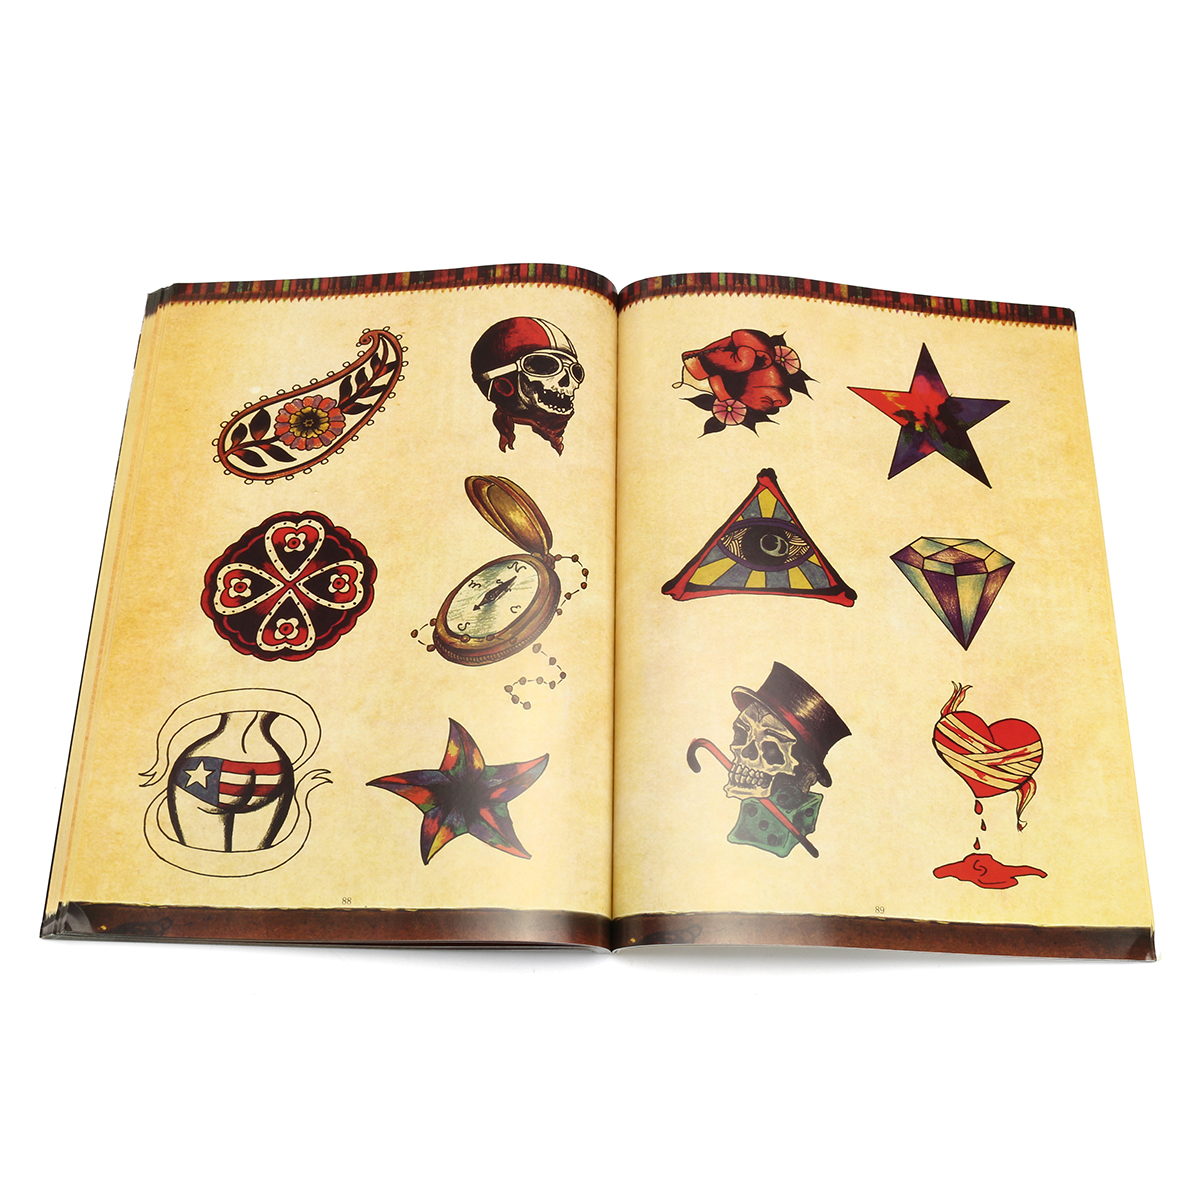 Traditional-Chinese-Traditional-Elements-Of-108-Pages-Of-Tattoo-Design-Flash-Book-1664910-10